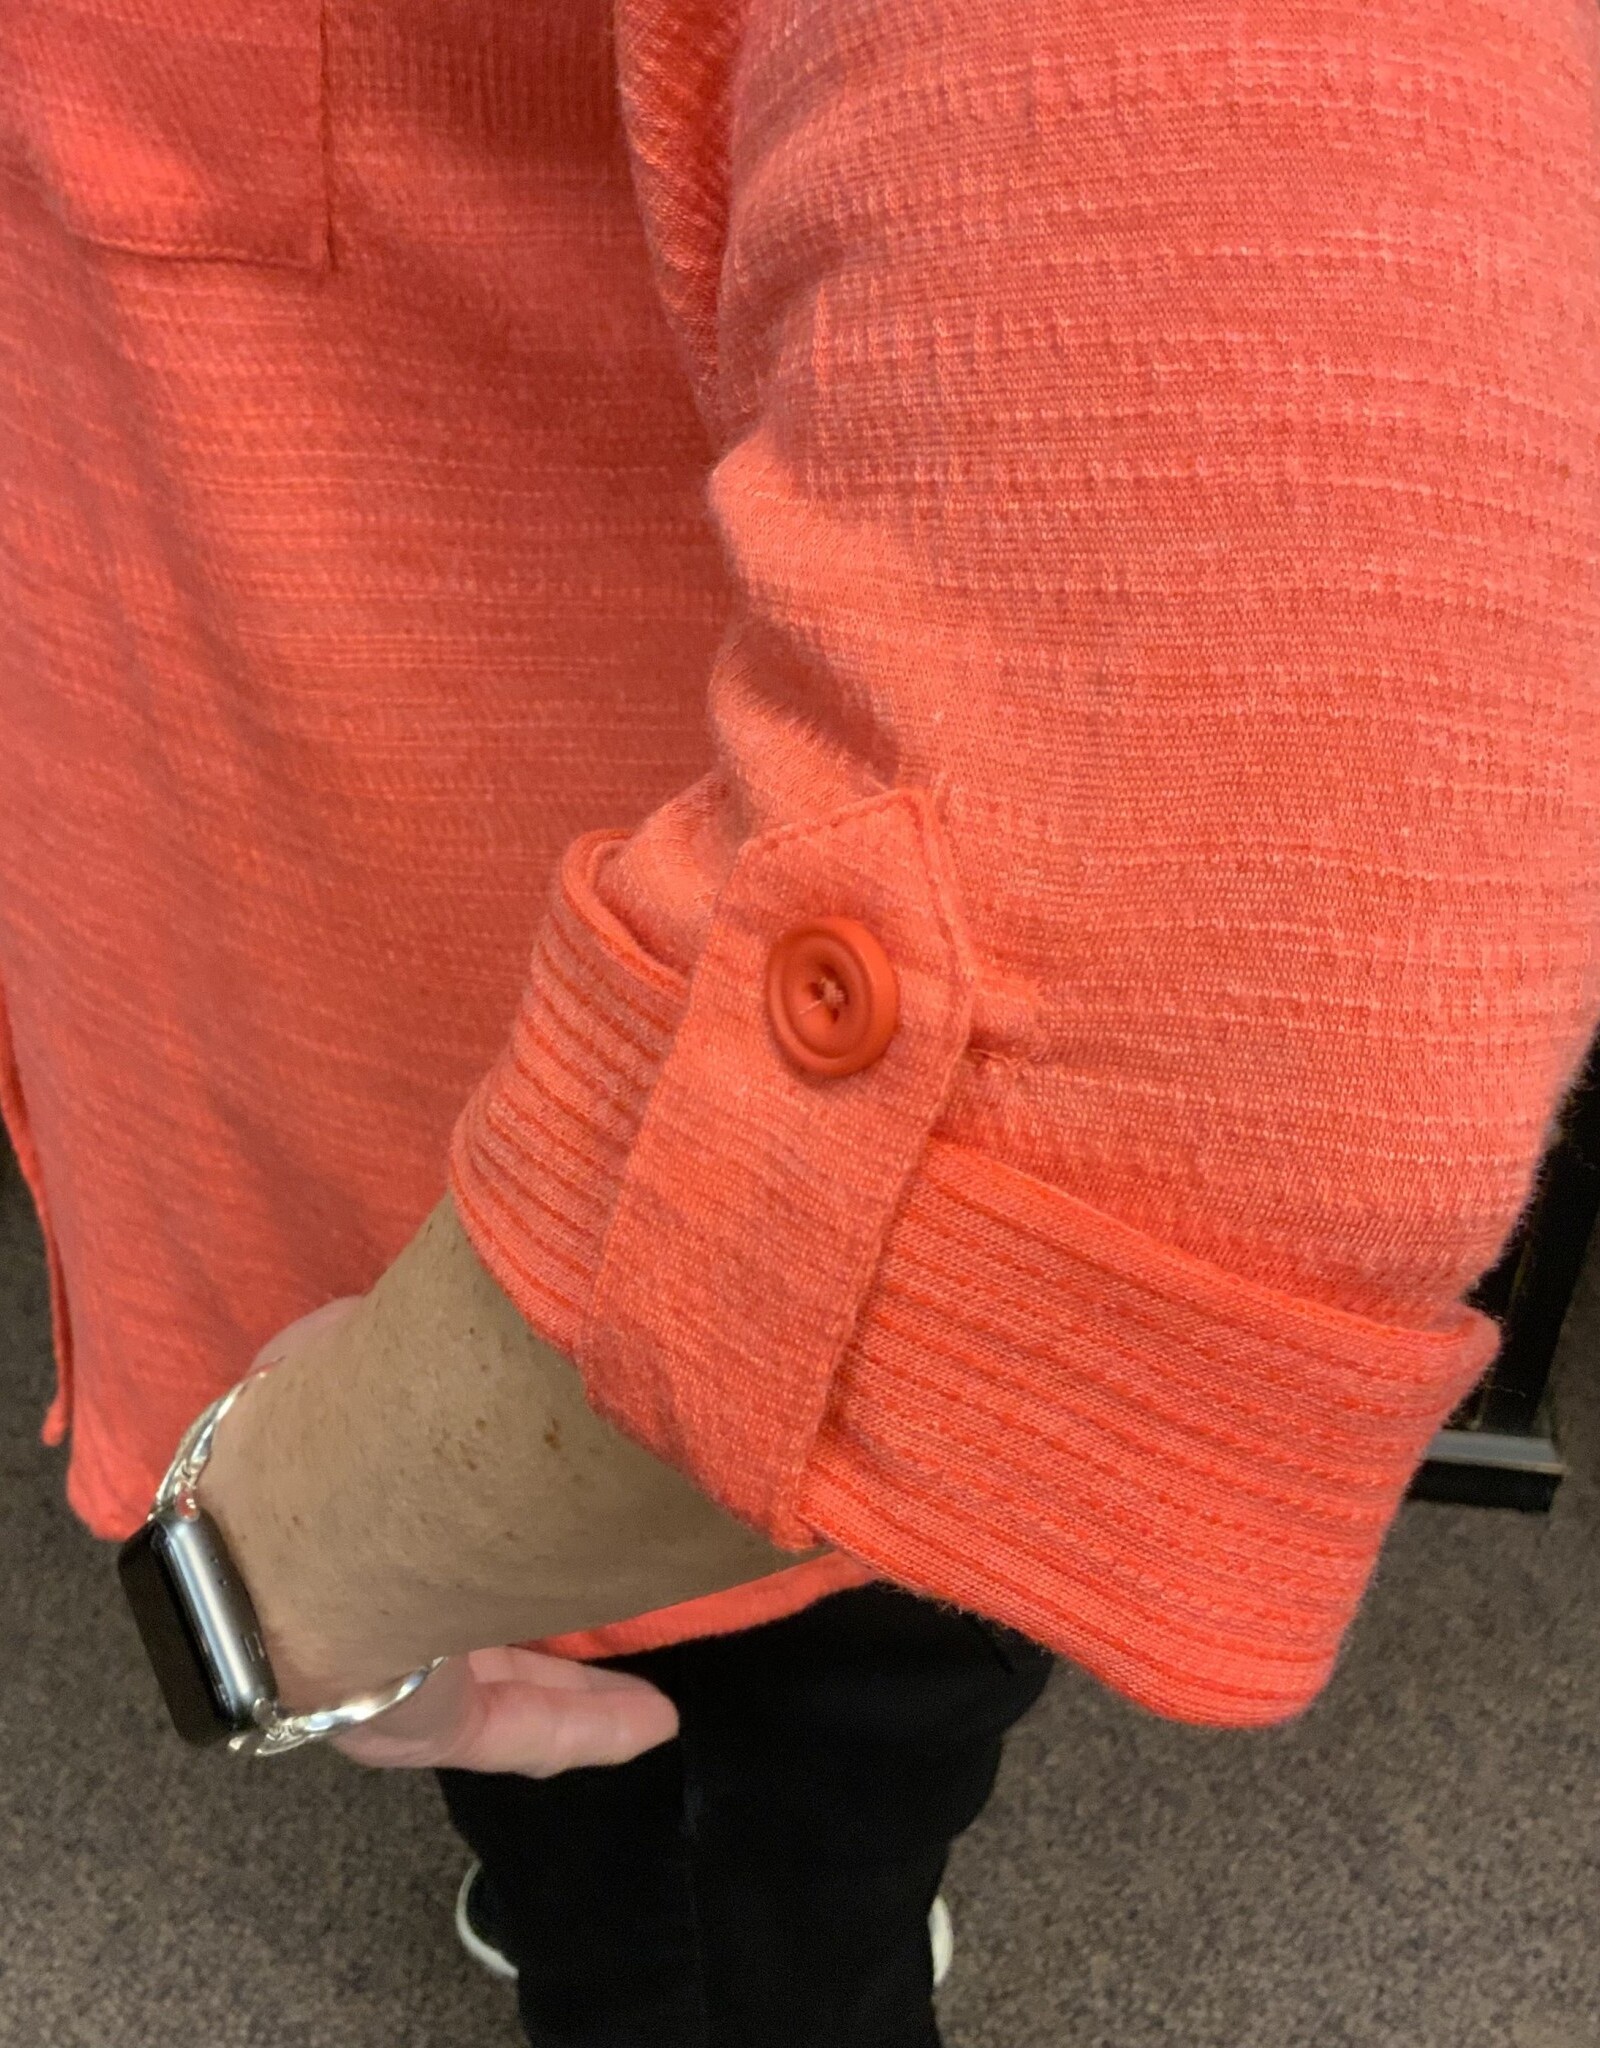 - Coral Textured V-Neck Button-Up Roll Sleeve w/Chest Pockets